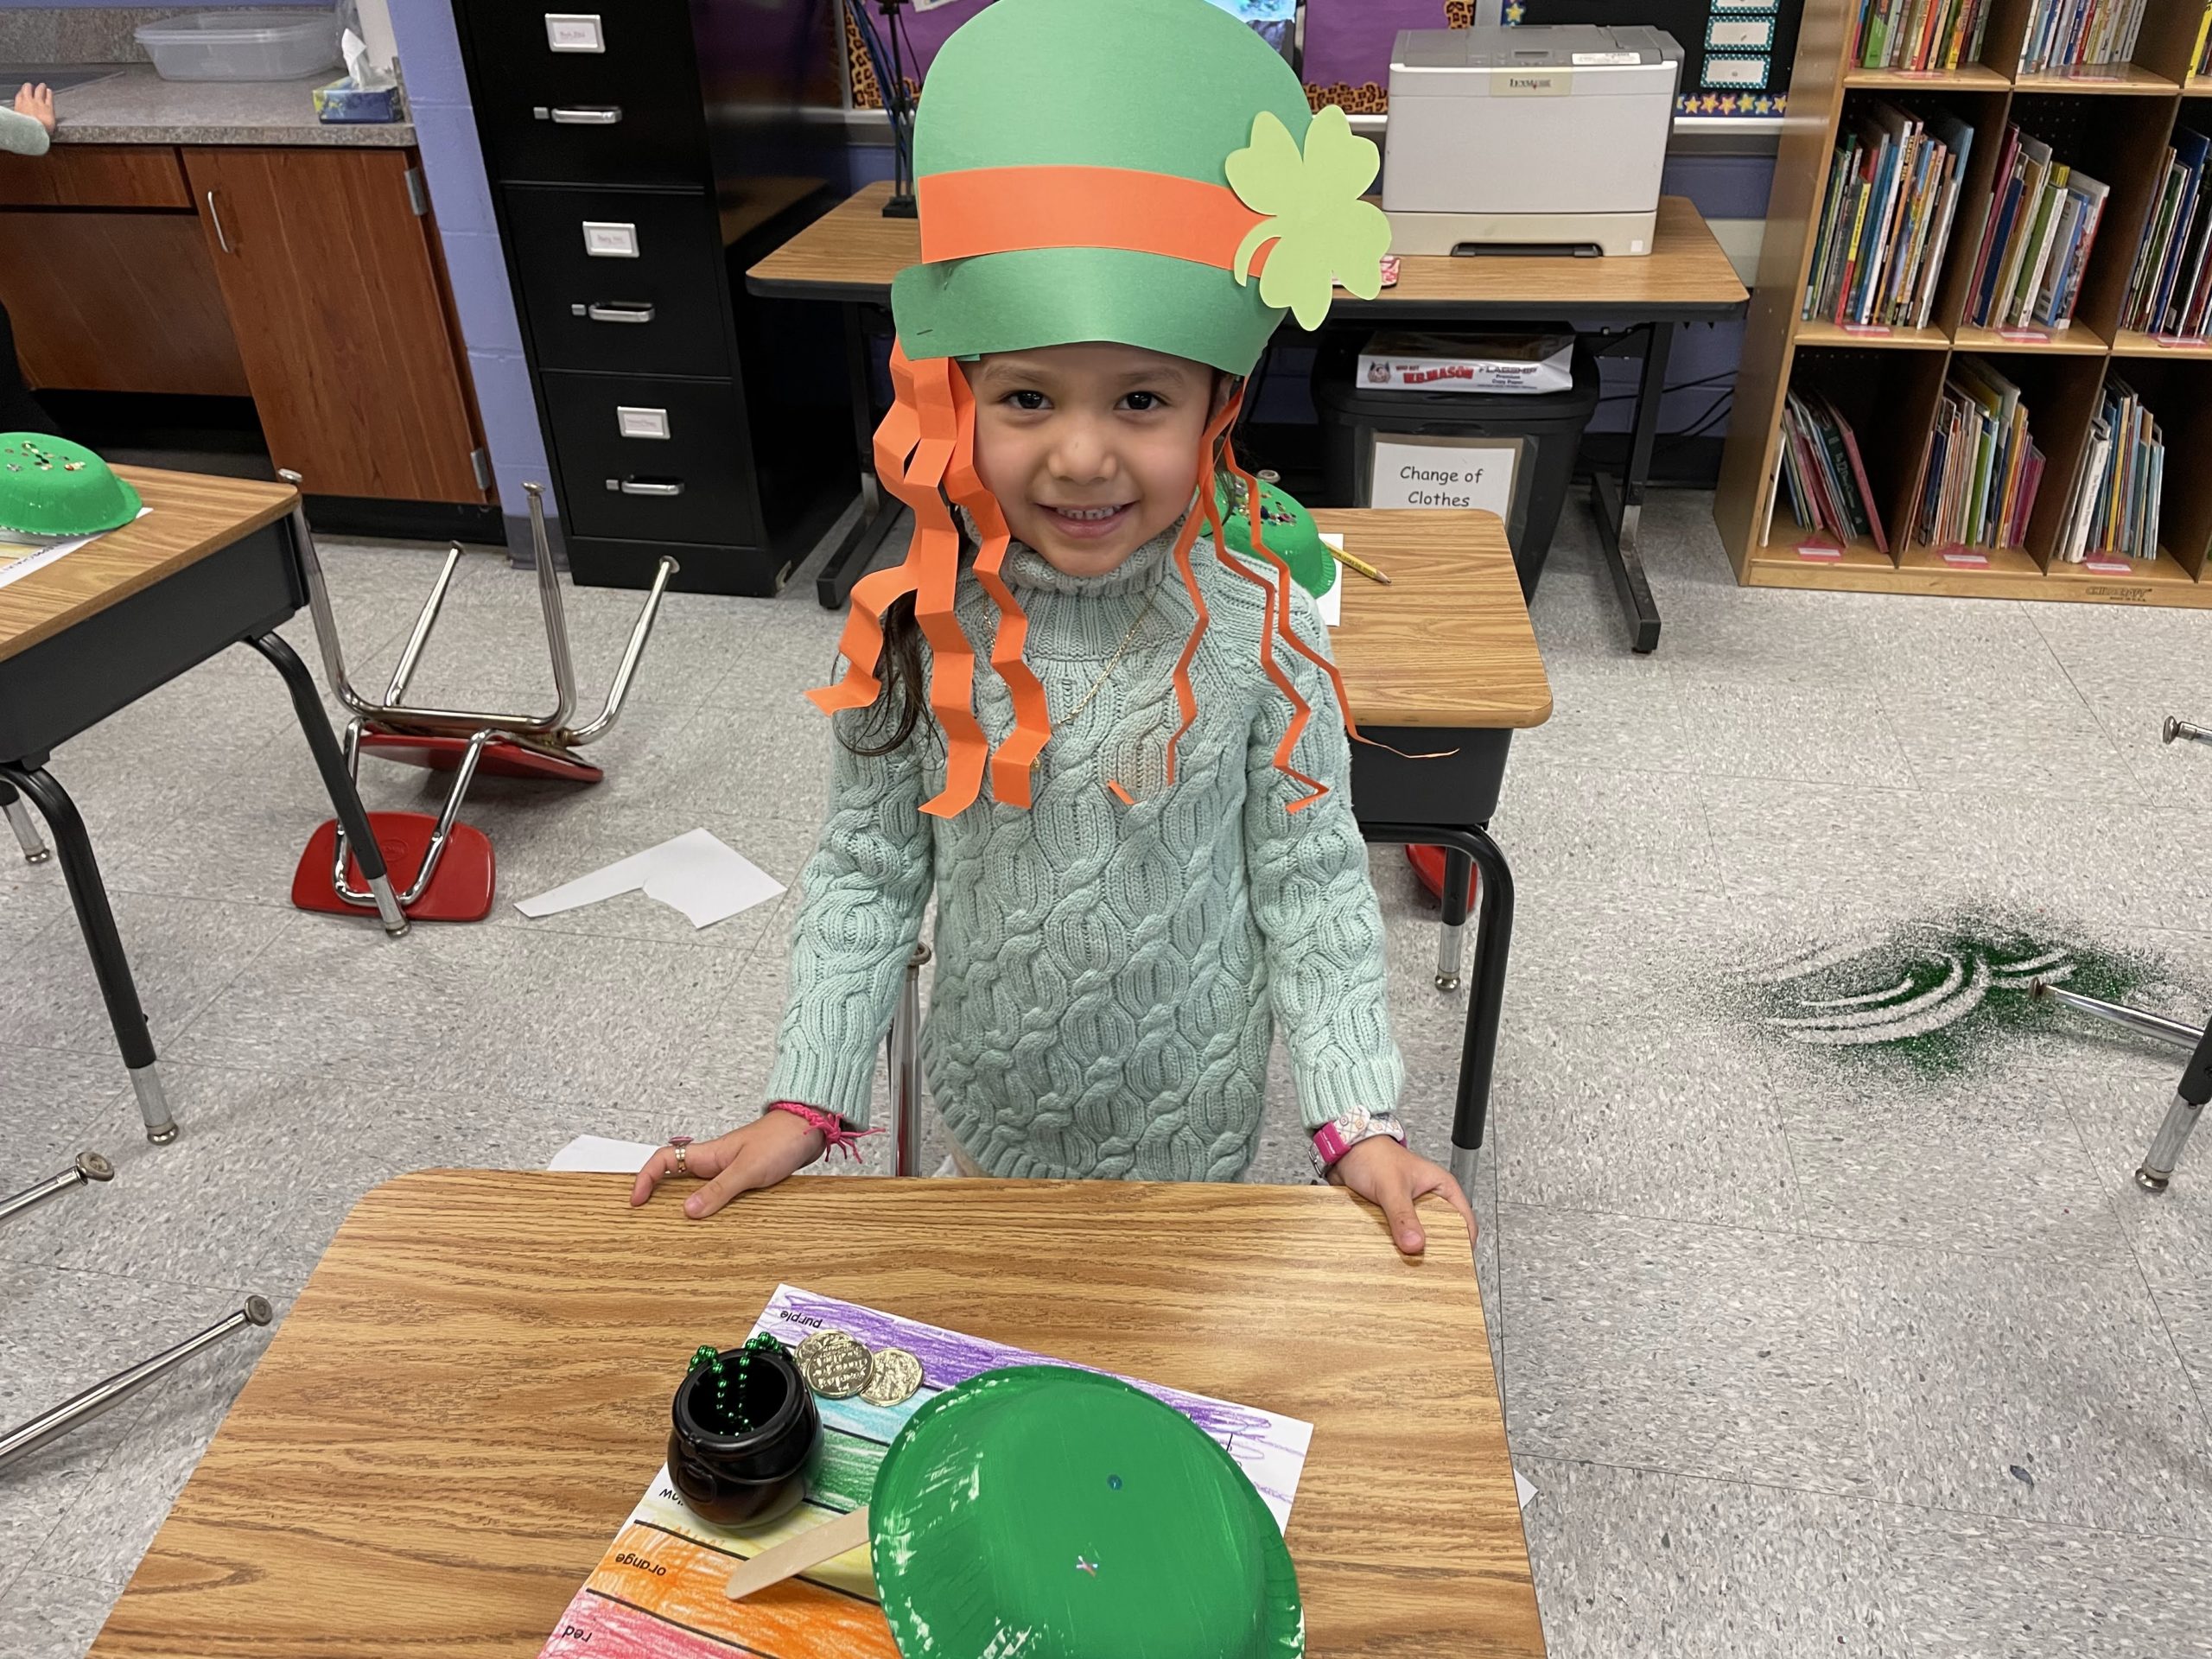 Hampton Bays Elementary School celebrated St. Patrick’s Day on March 17 with a variety of fun activities.